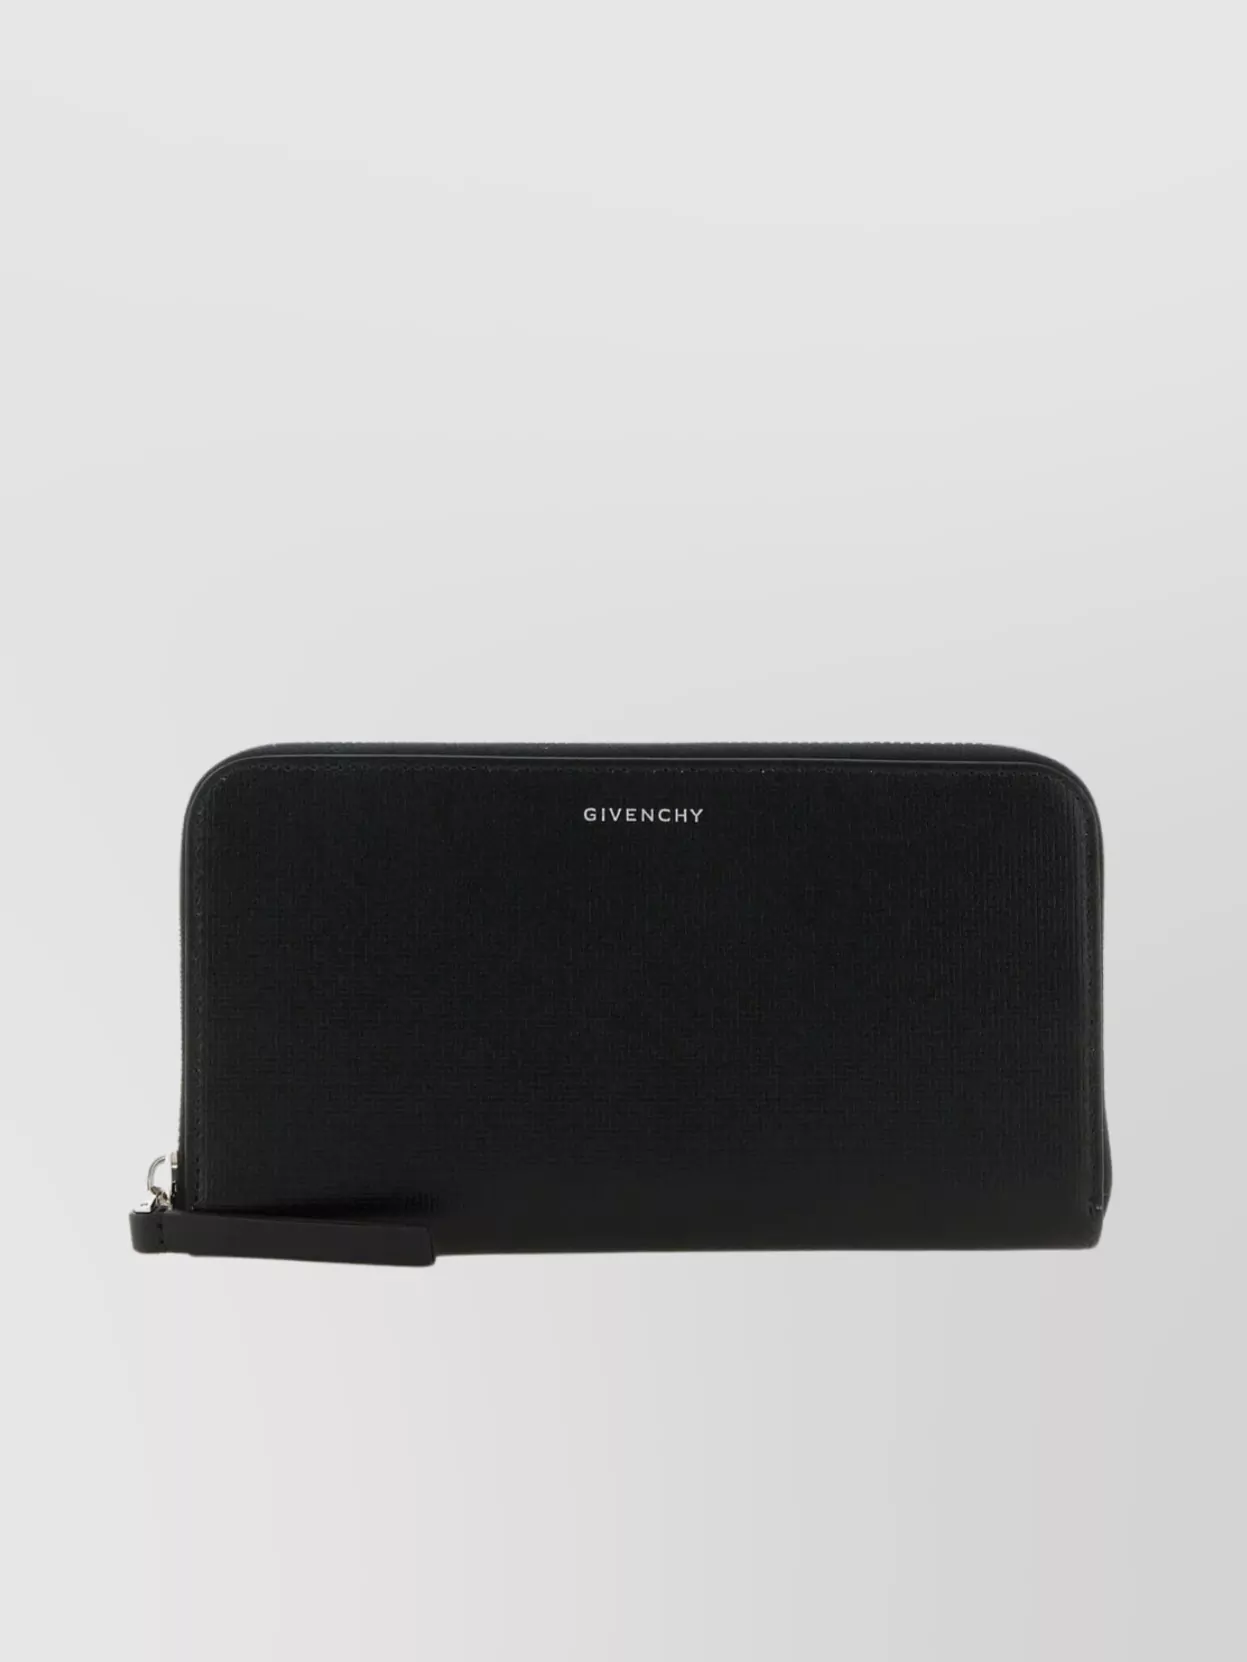 Givenchy Leather Wallet Zippered Textured Finish In Black